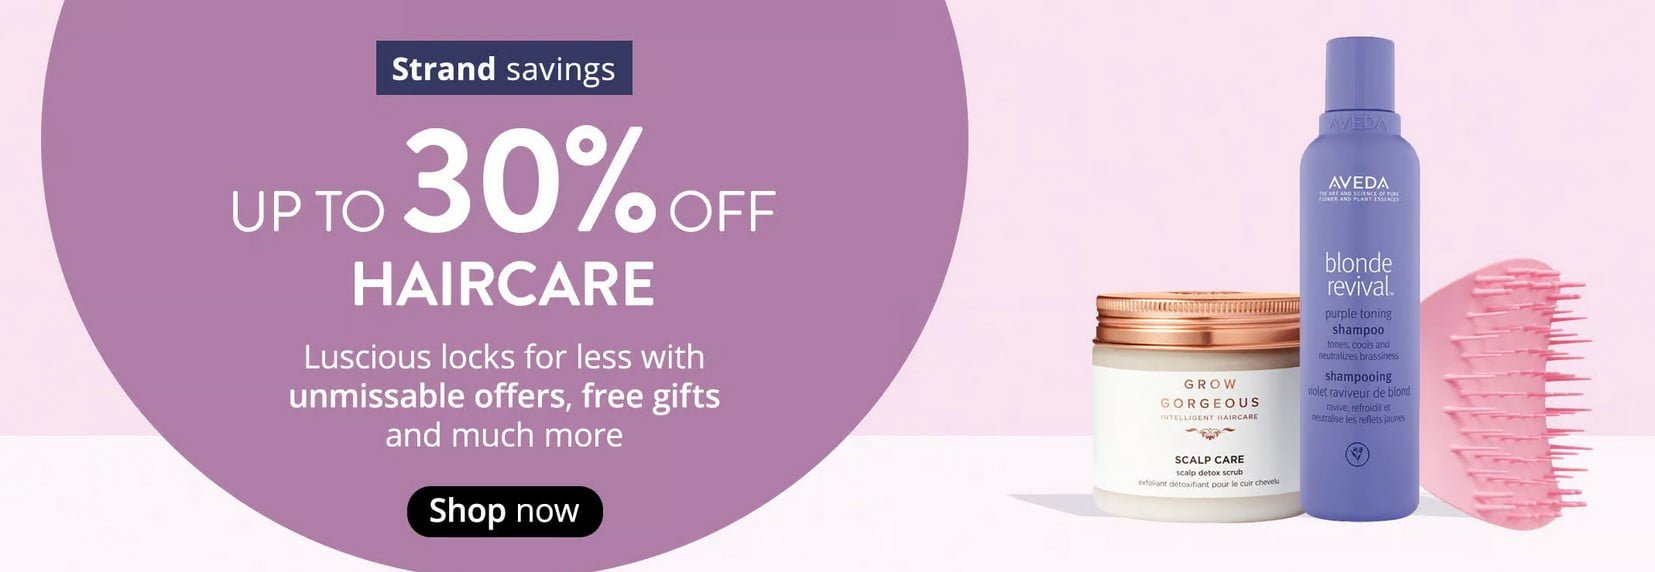 Up to 30% off Haircare at Sephora UK